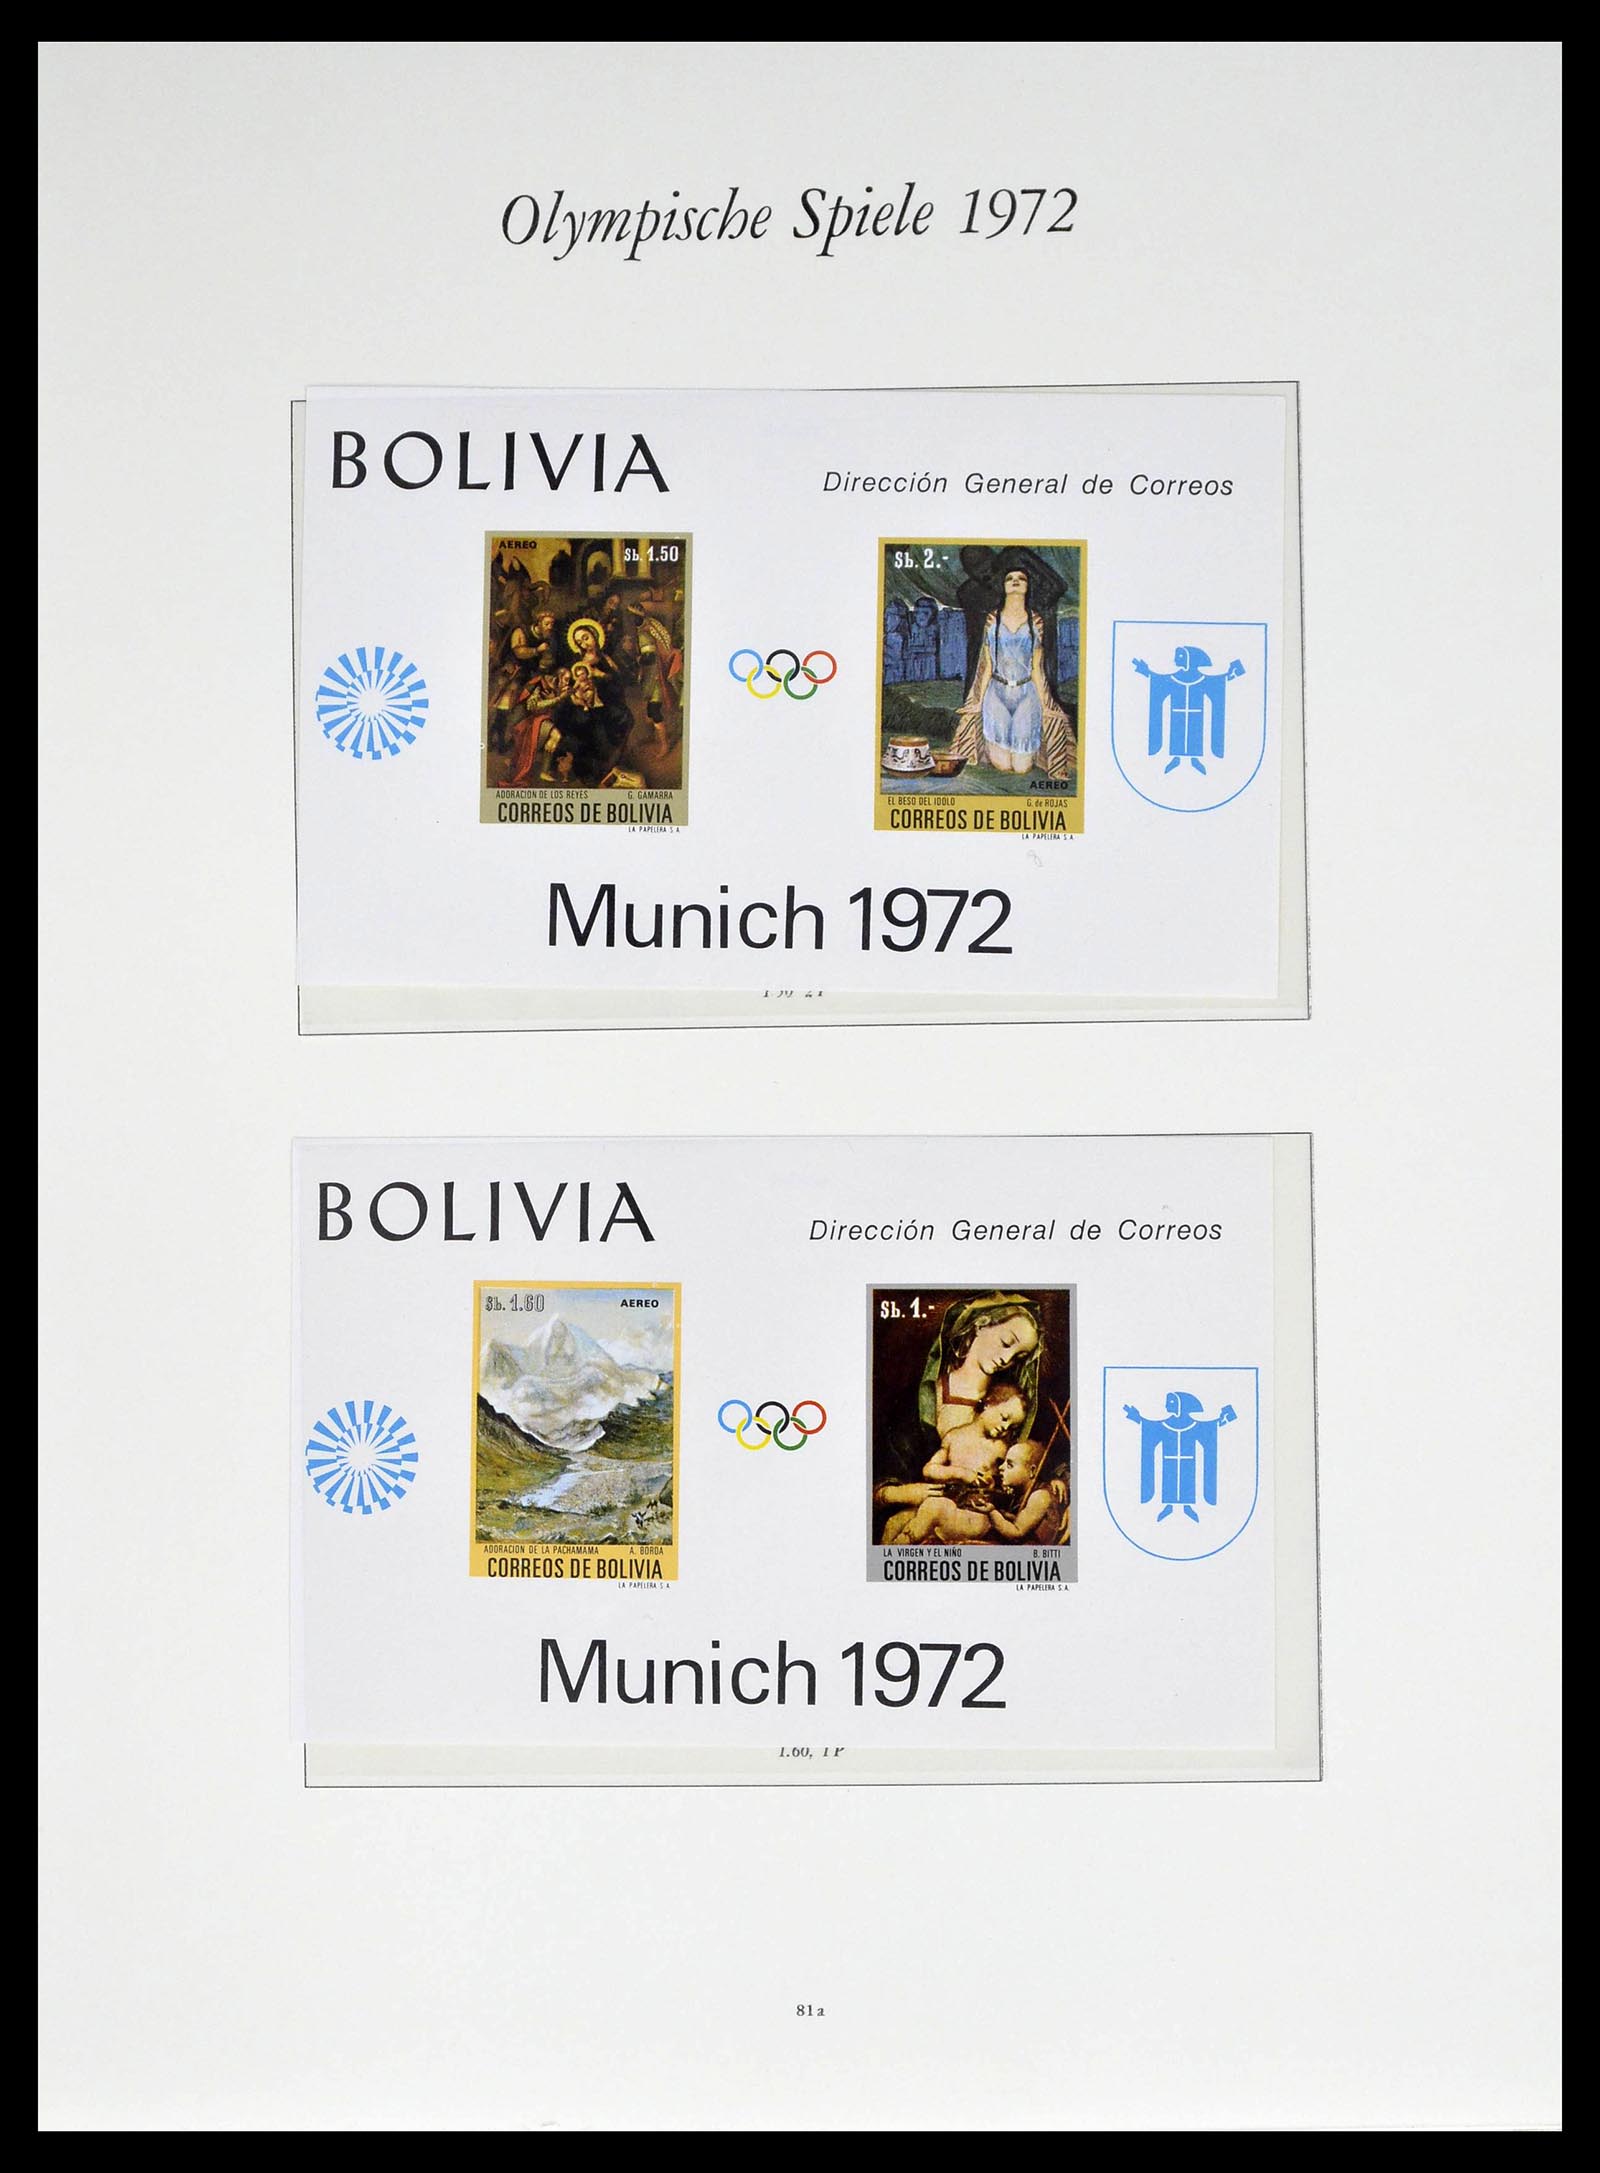 39237 0026 - Stamp collection 39237 Olympics 1972.